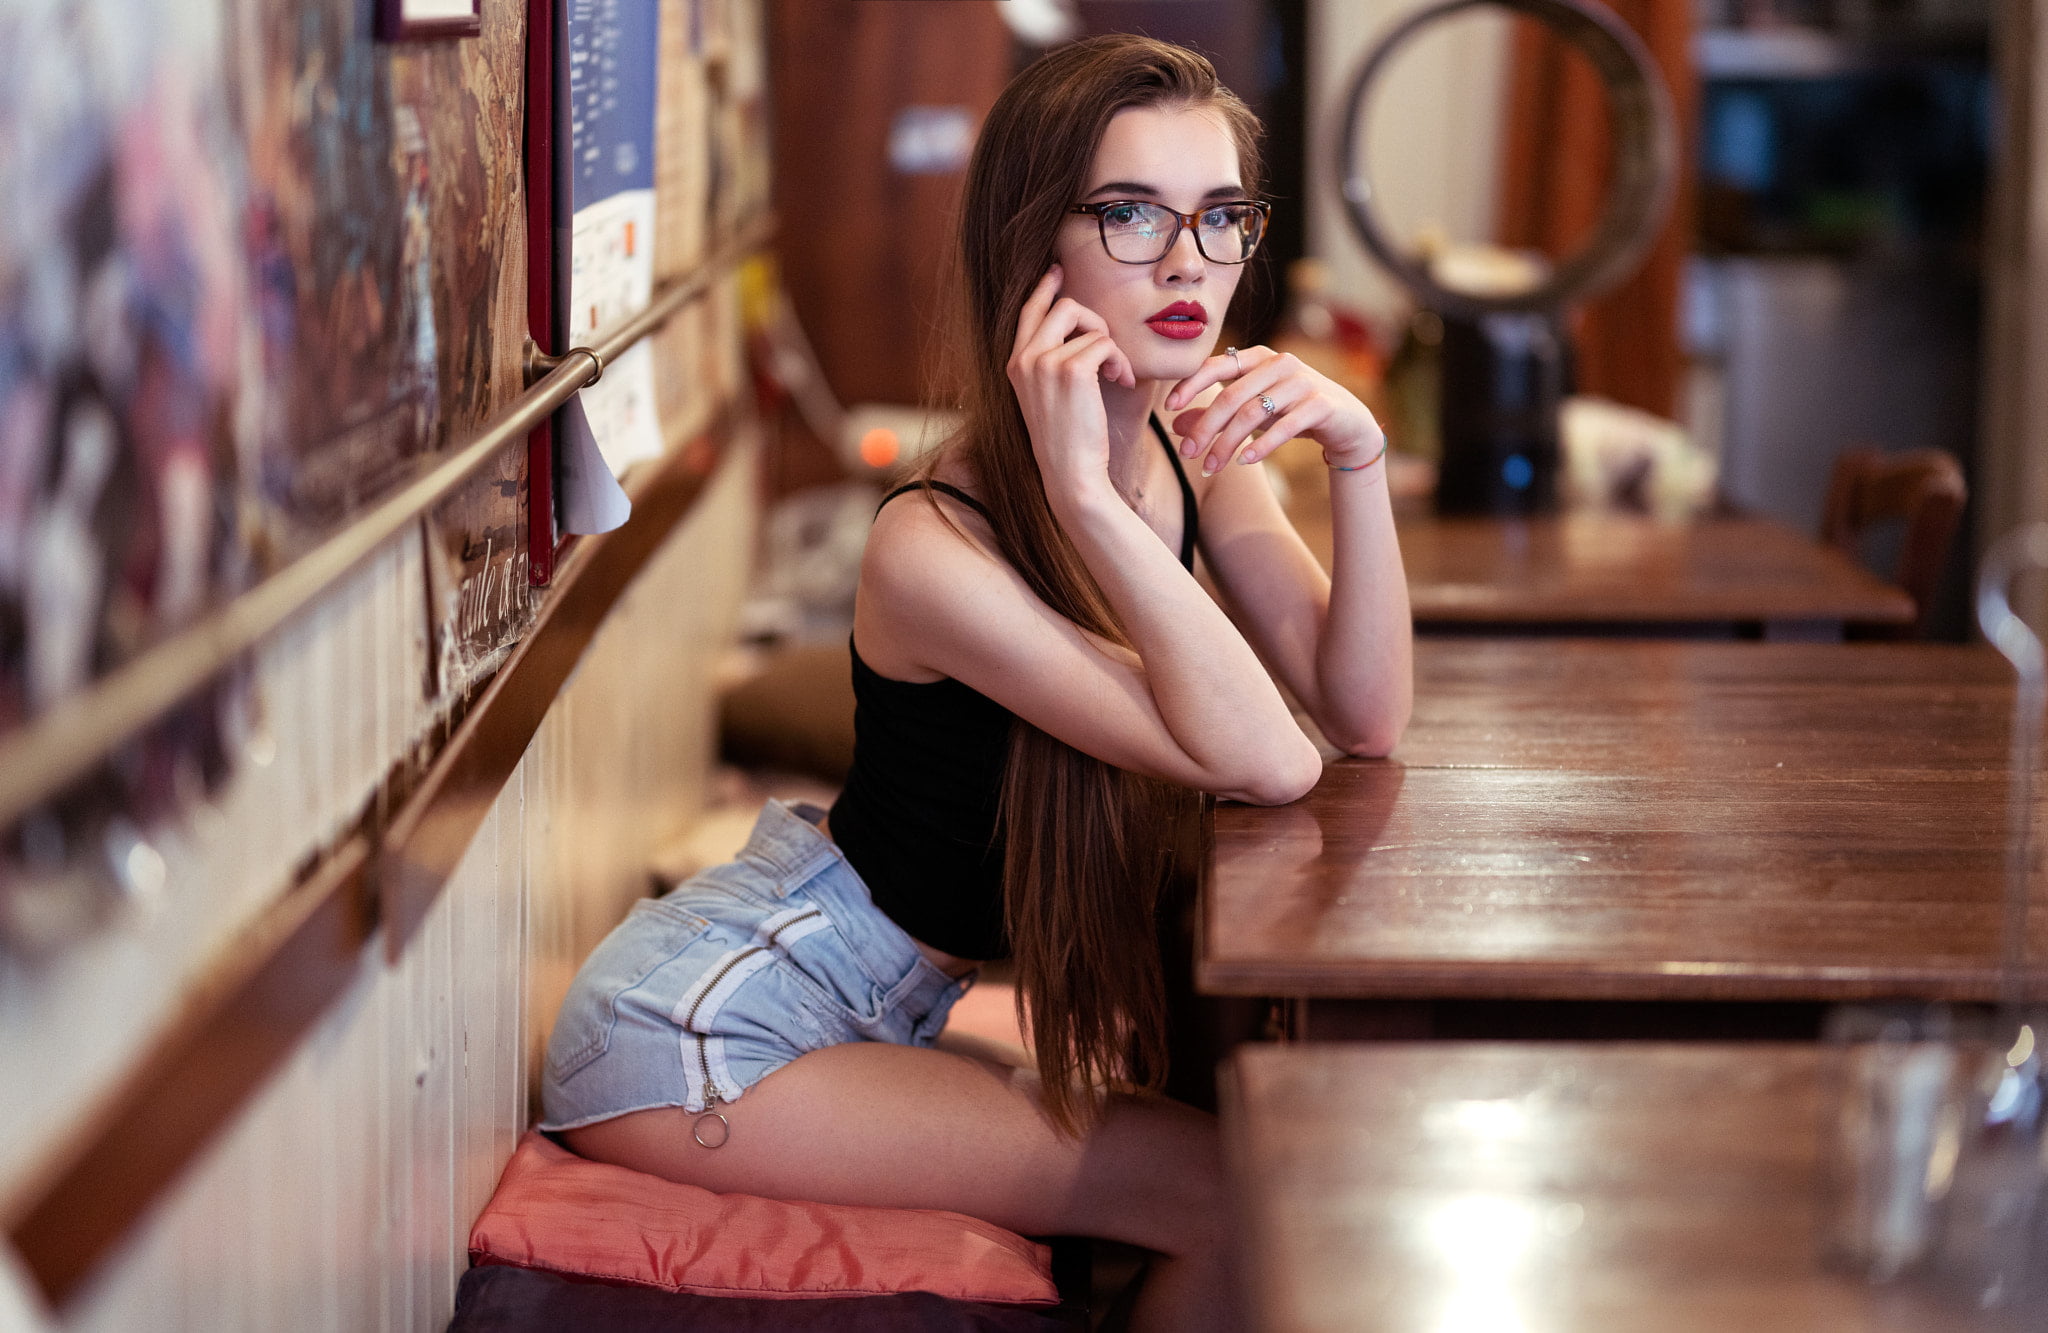 women, red lipstick, jean shorts, long hair, women with glasses